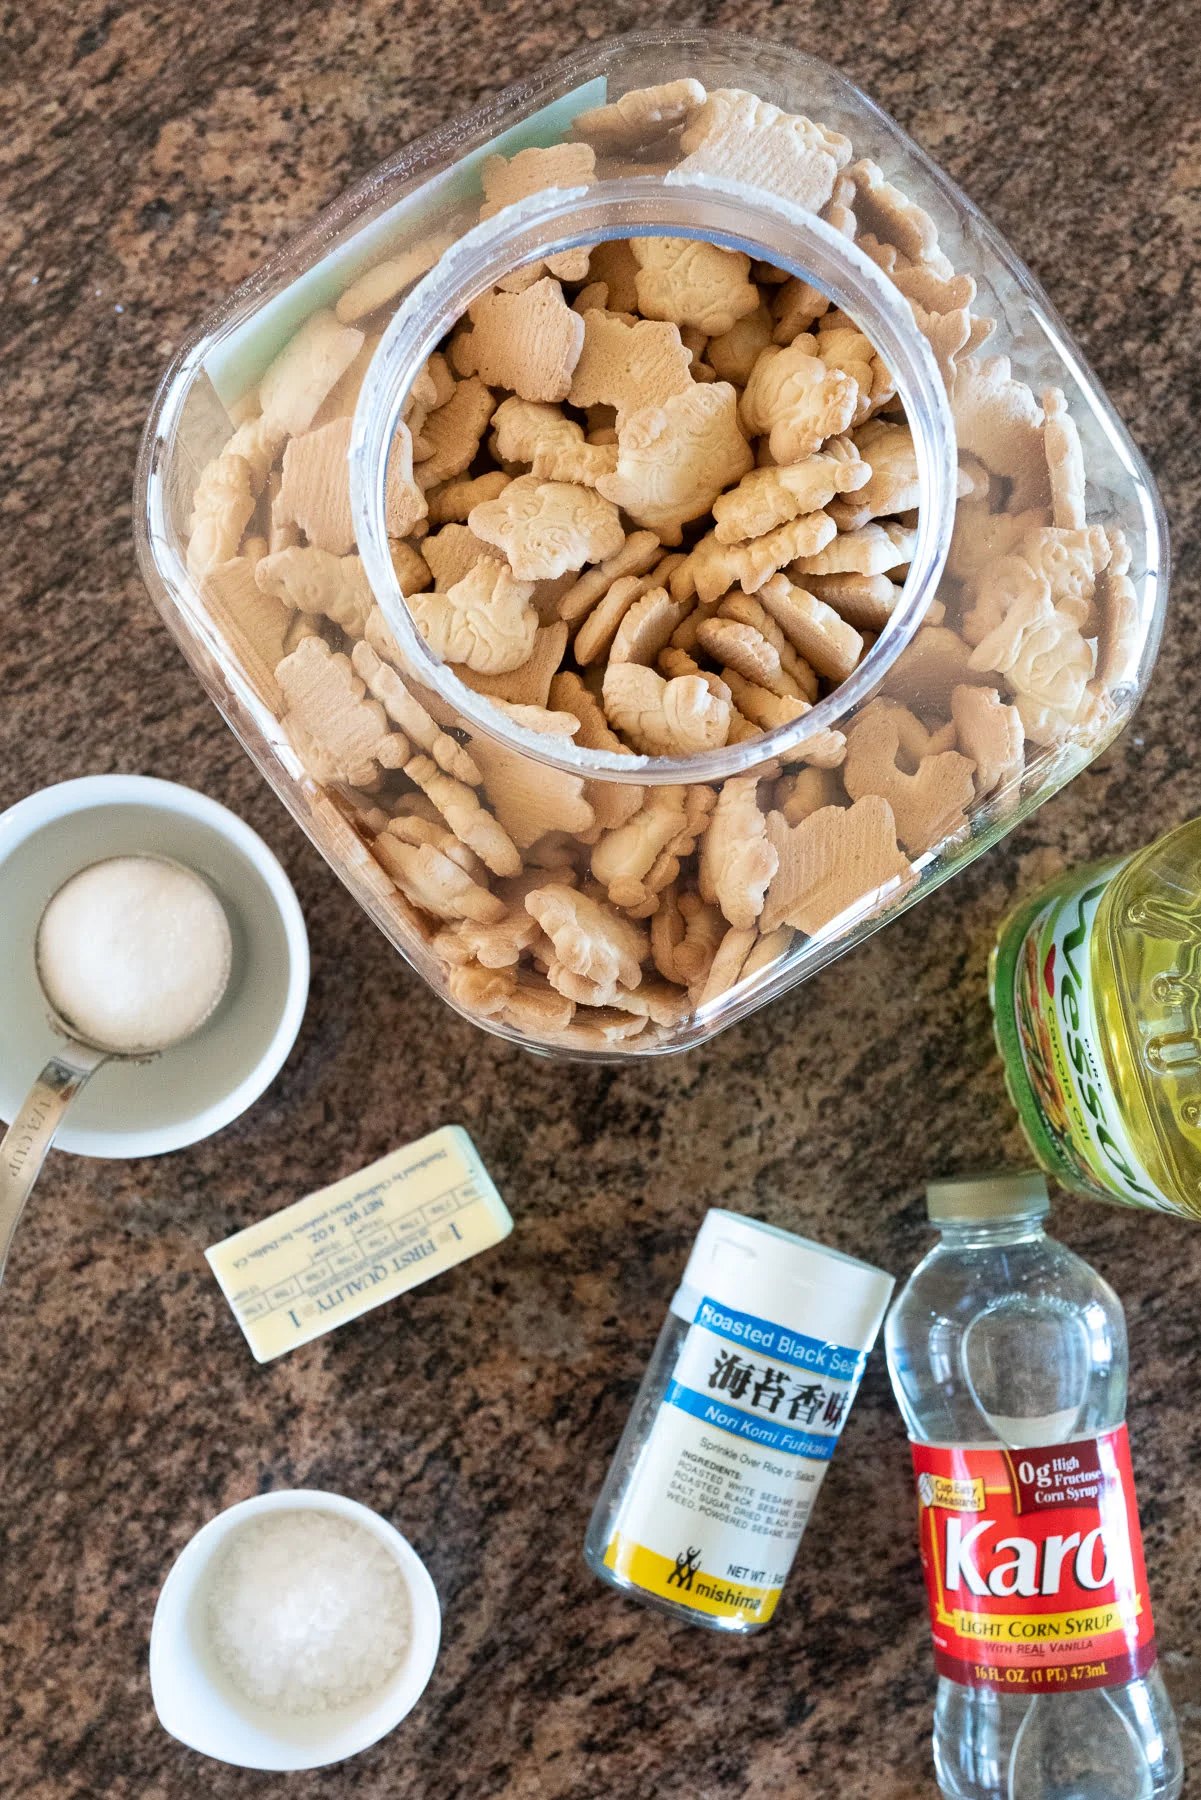 Ingredients to make furikake animal crackers laid out on the counter.